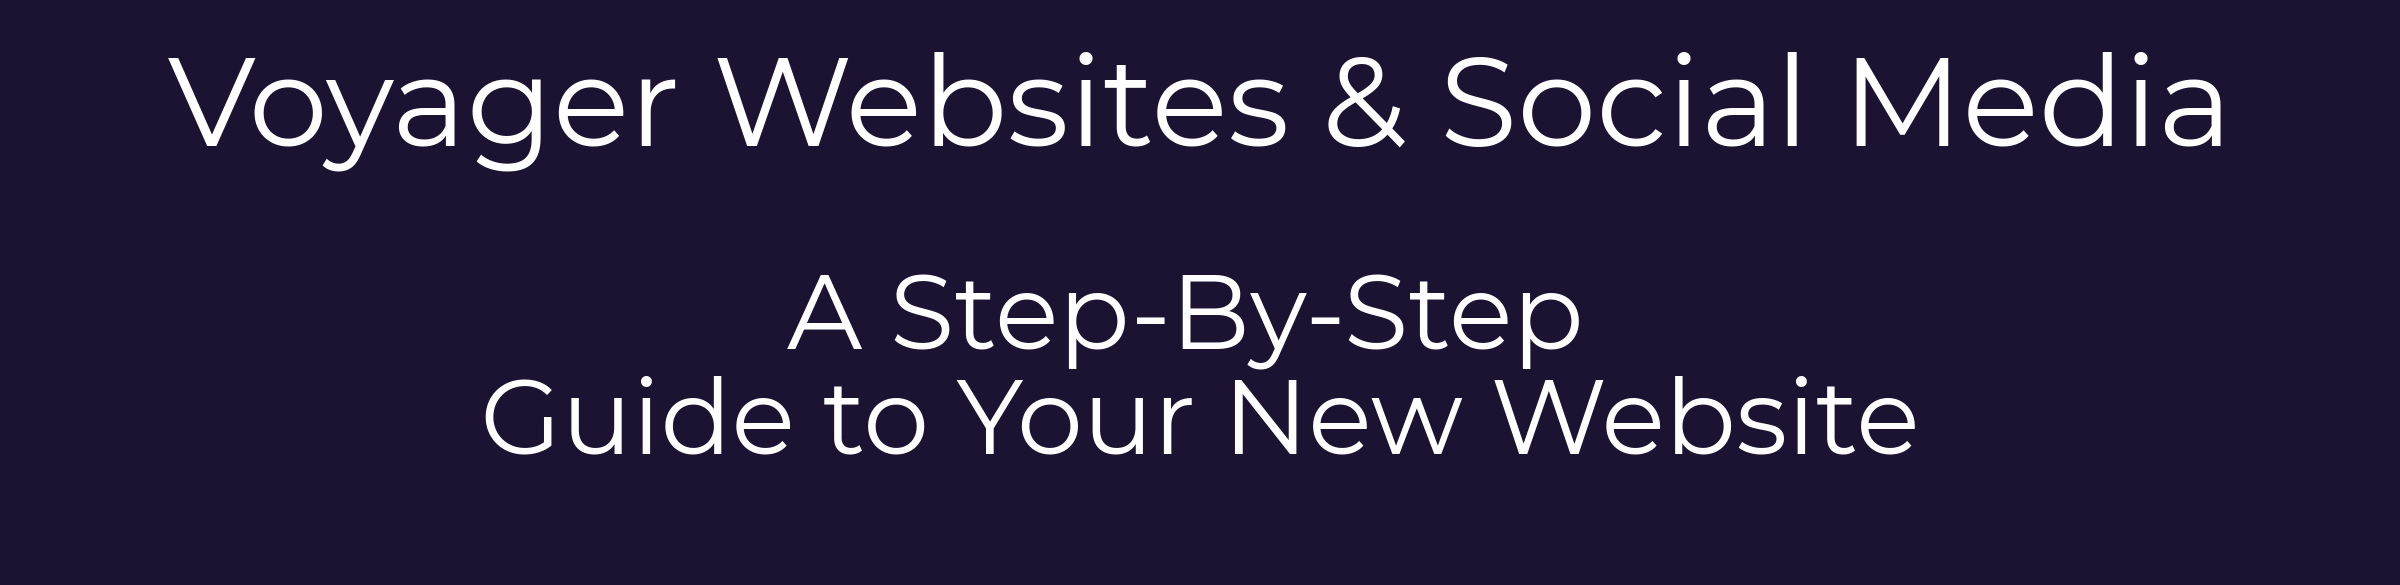 Voyager websites: a step by step guide to your new website